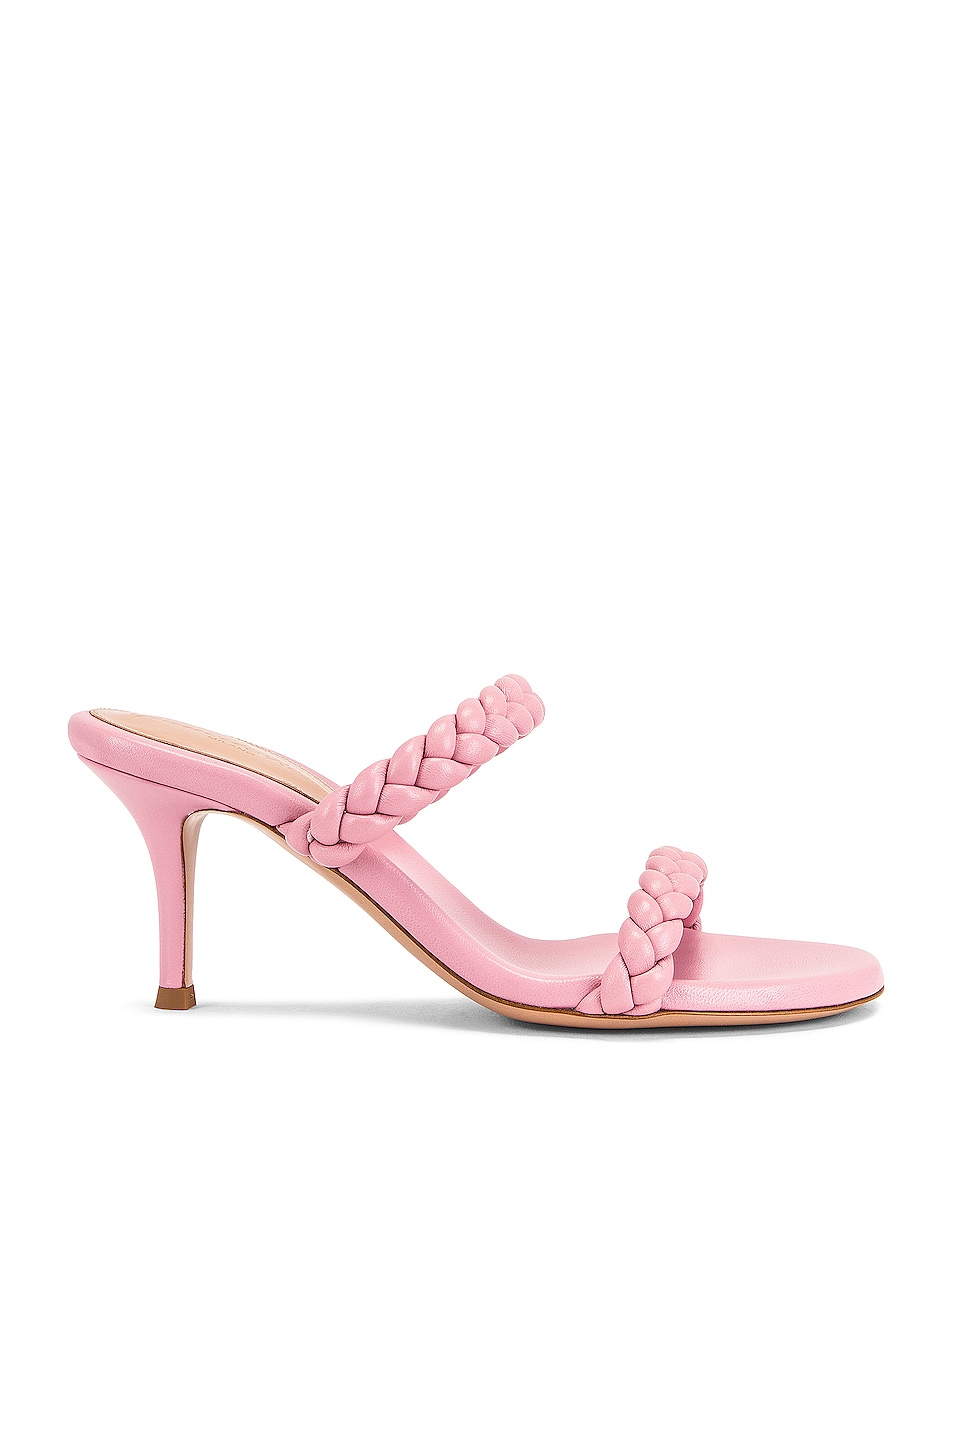 Image 1 of Gianvito Rossi Braided Sandals in Glaze